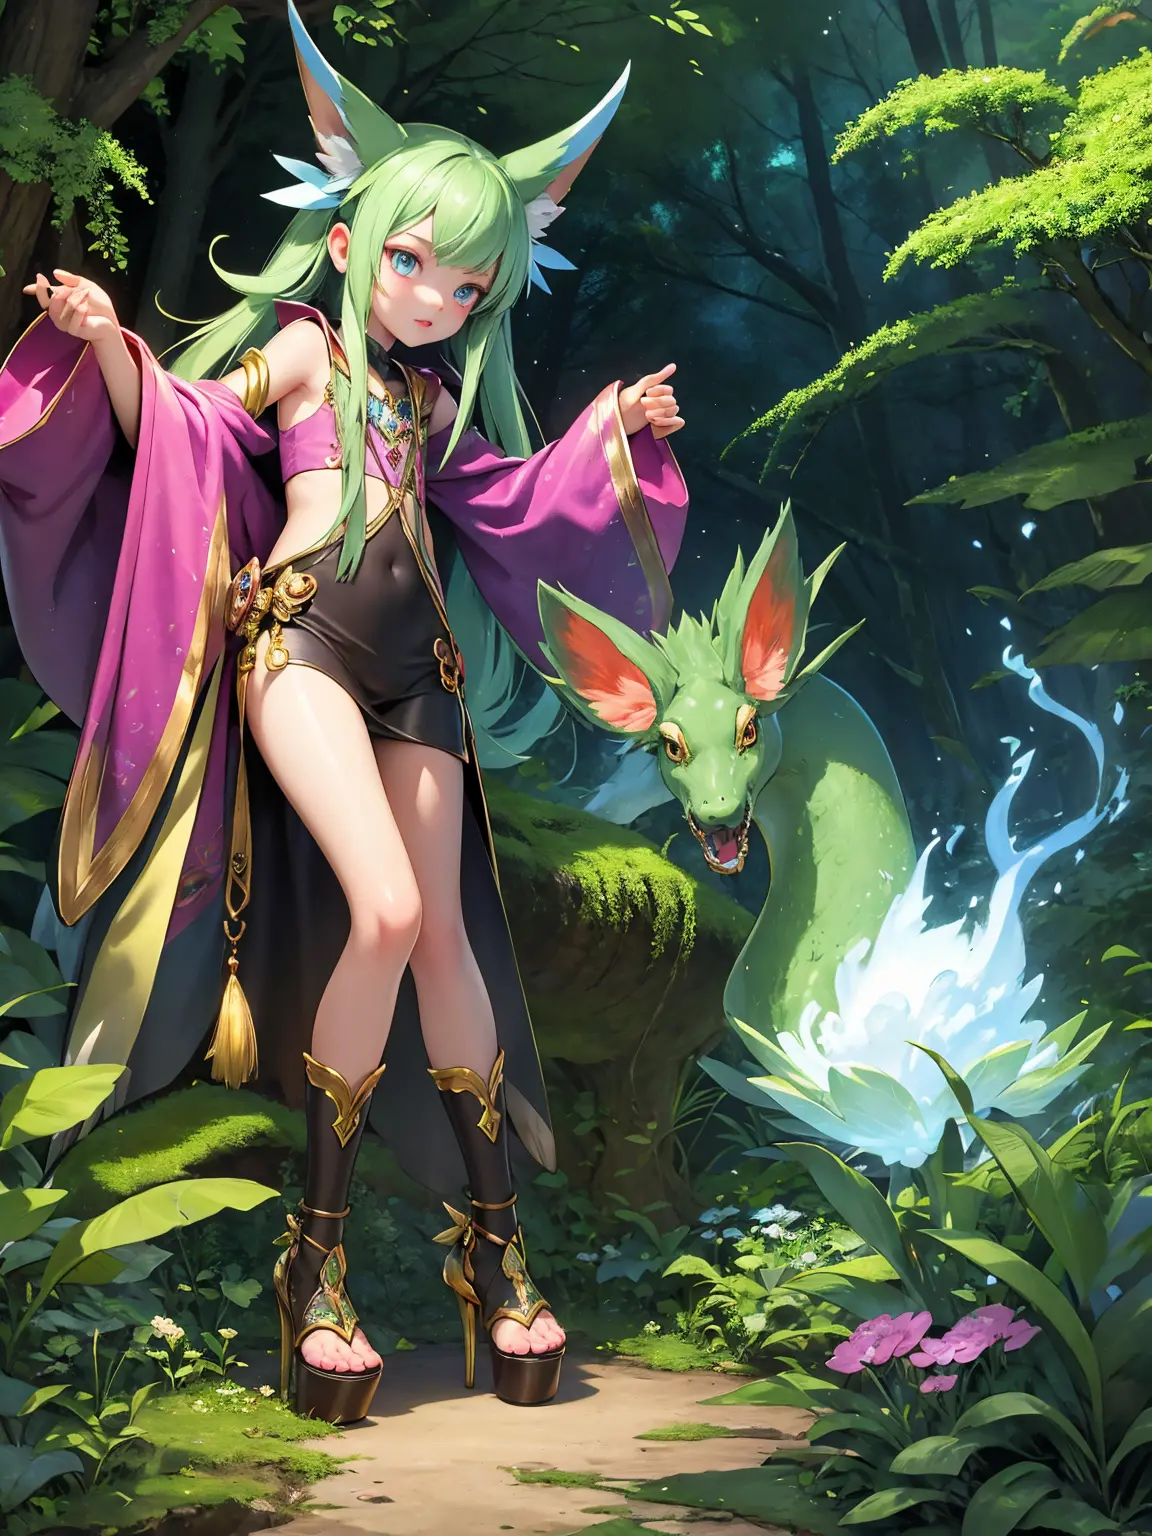 A magical forest with a Digimon and 1 girl, created using digital illustration techniques. The girl has beautiful detailed eyes,...